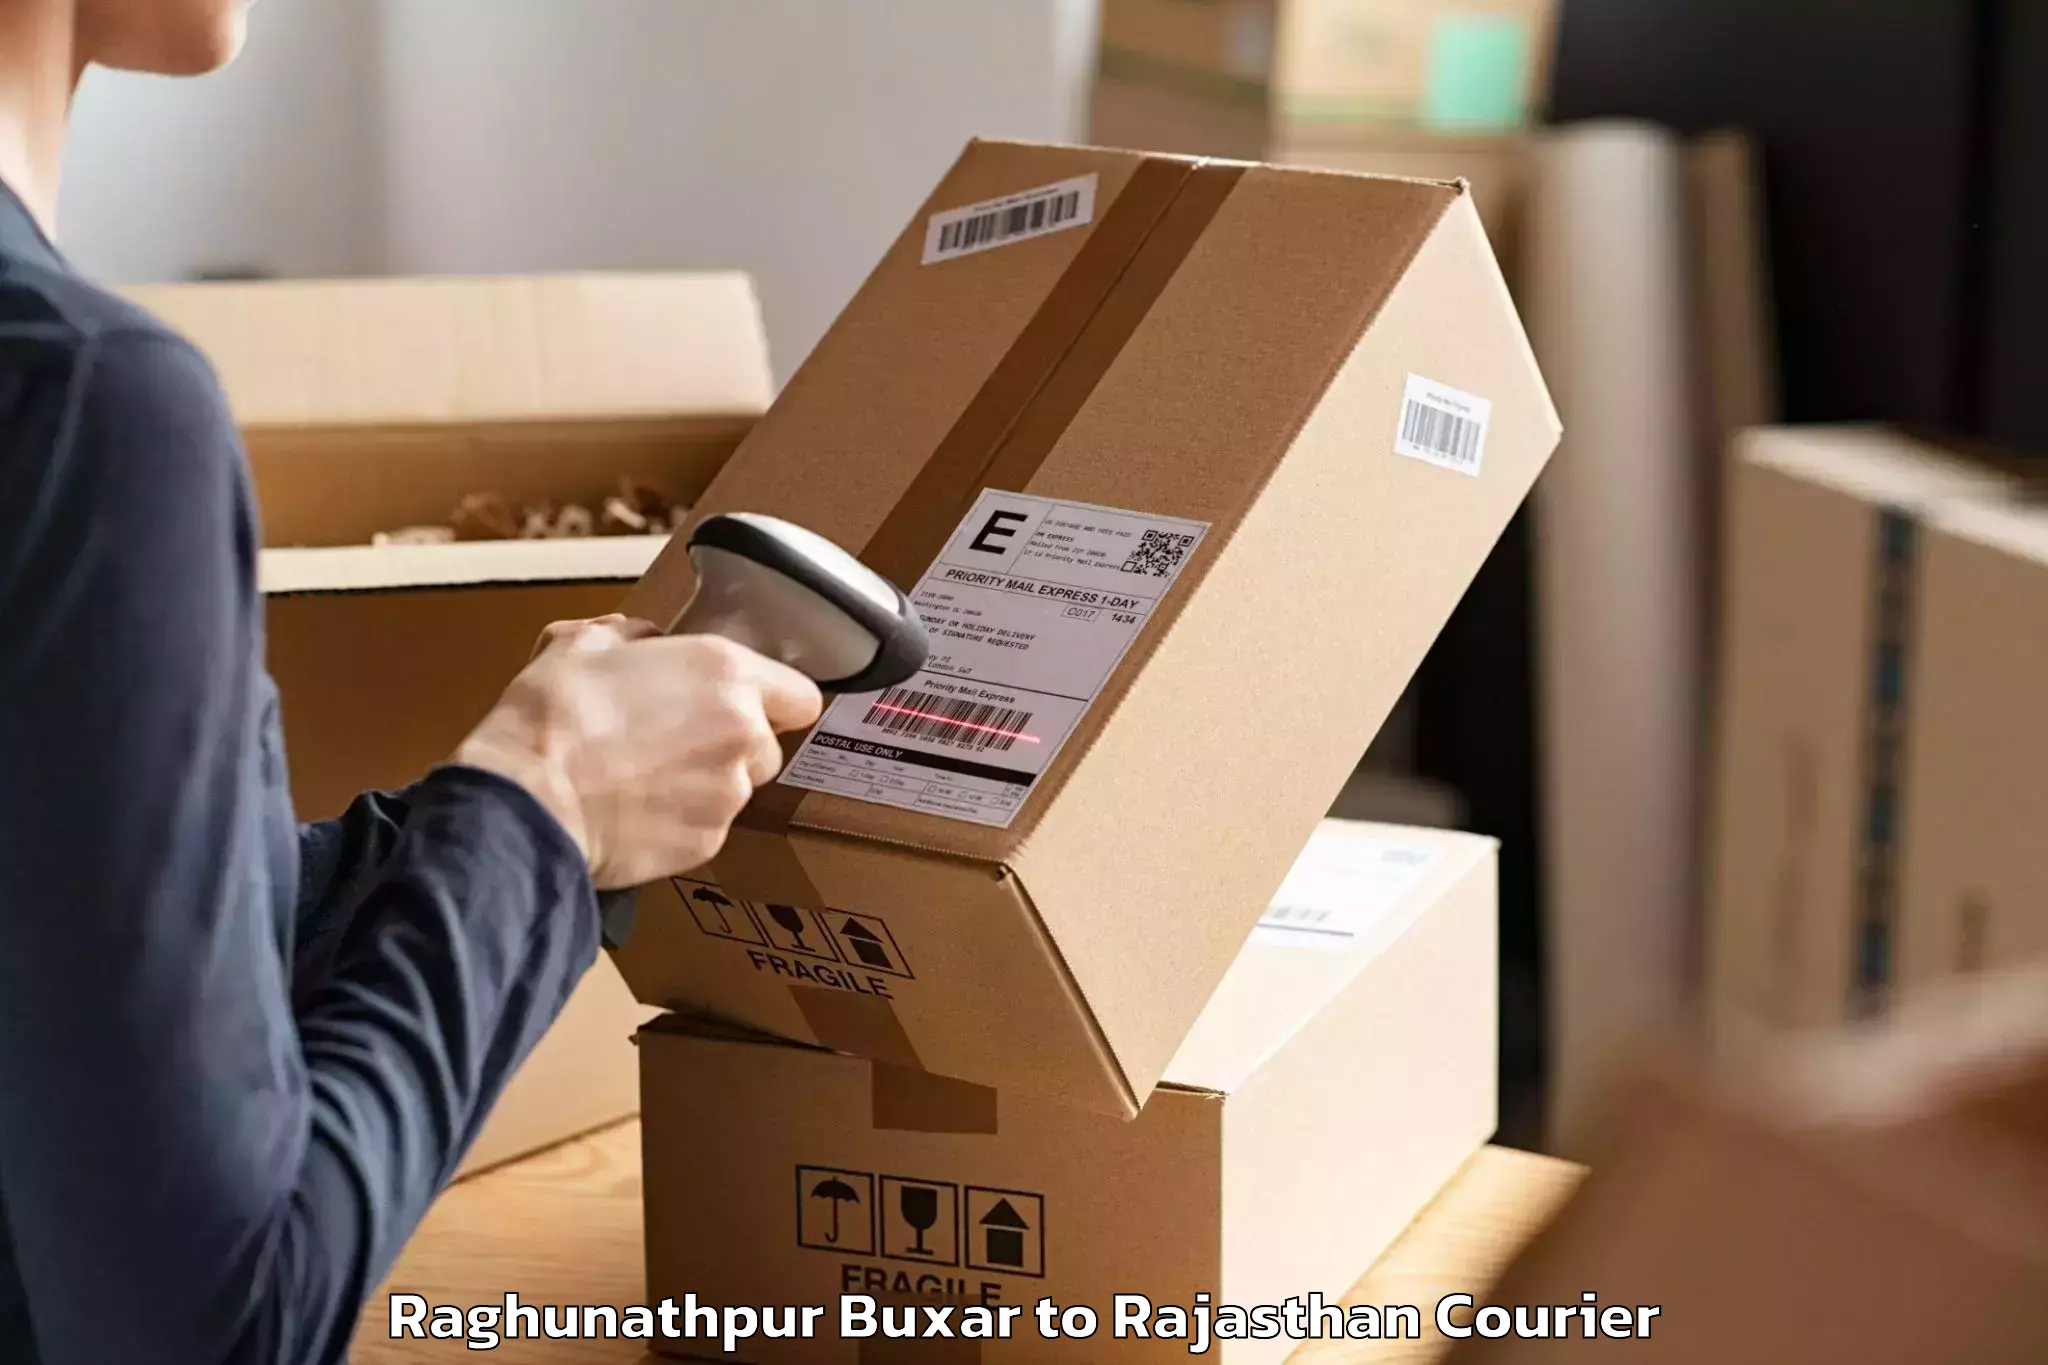 Moving and storage services Raghunathpur Buxar to Udaipur